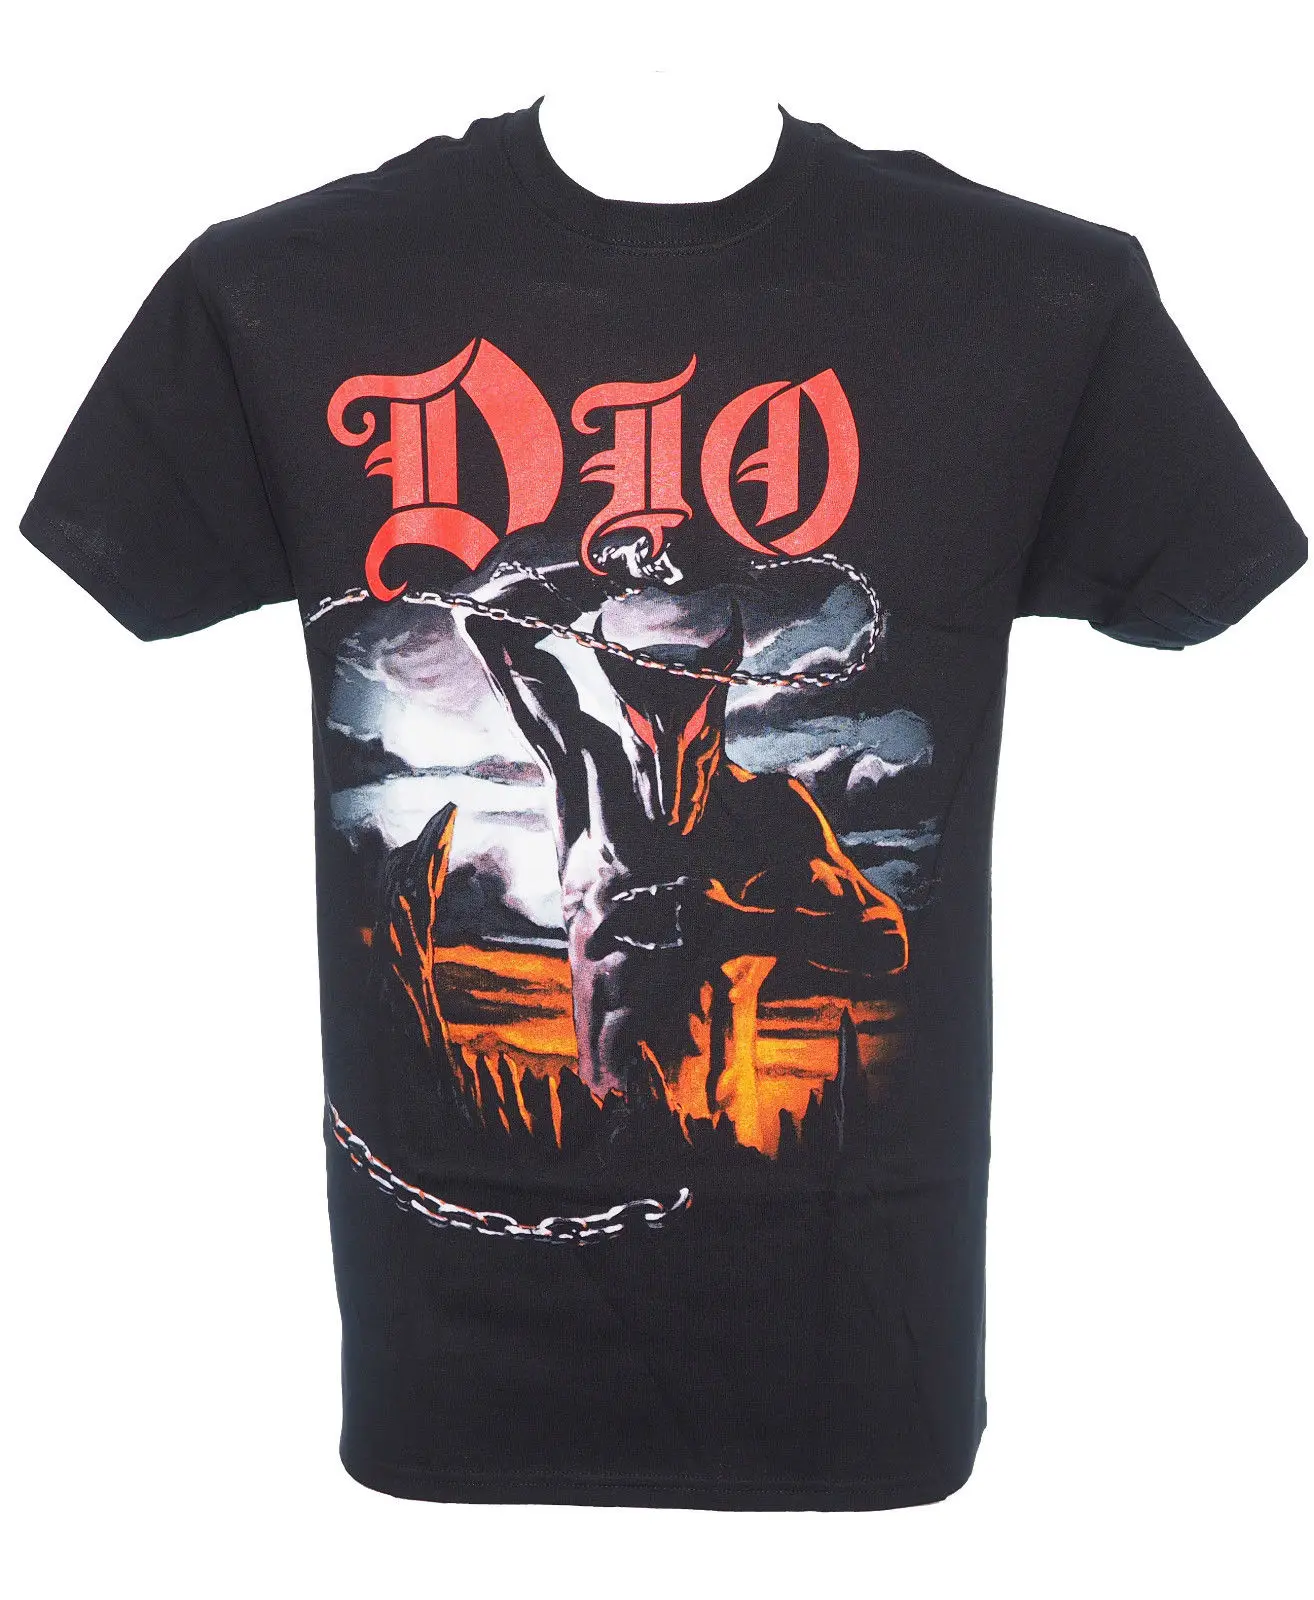 

Dio Holy Diver Official Licensed T-Shirt Heavy Metal New S-3Xl O Neck Short Sleeves Boy Cotton Men T Shirt Top Tee